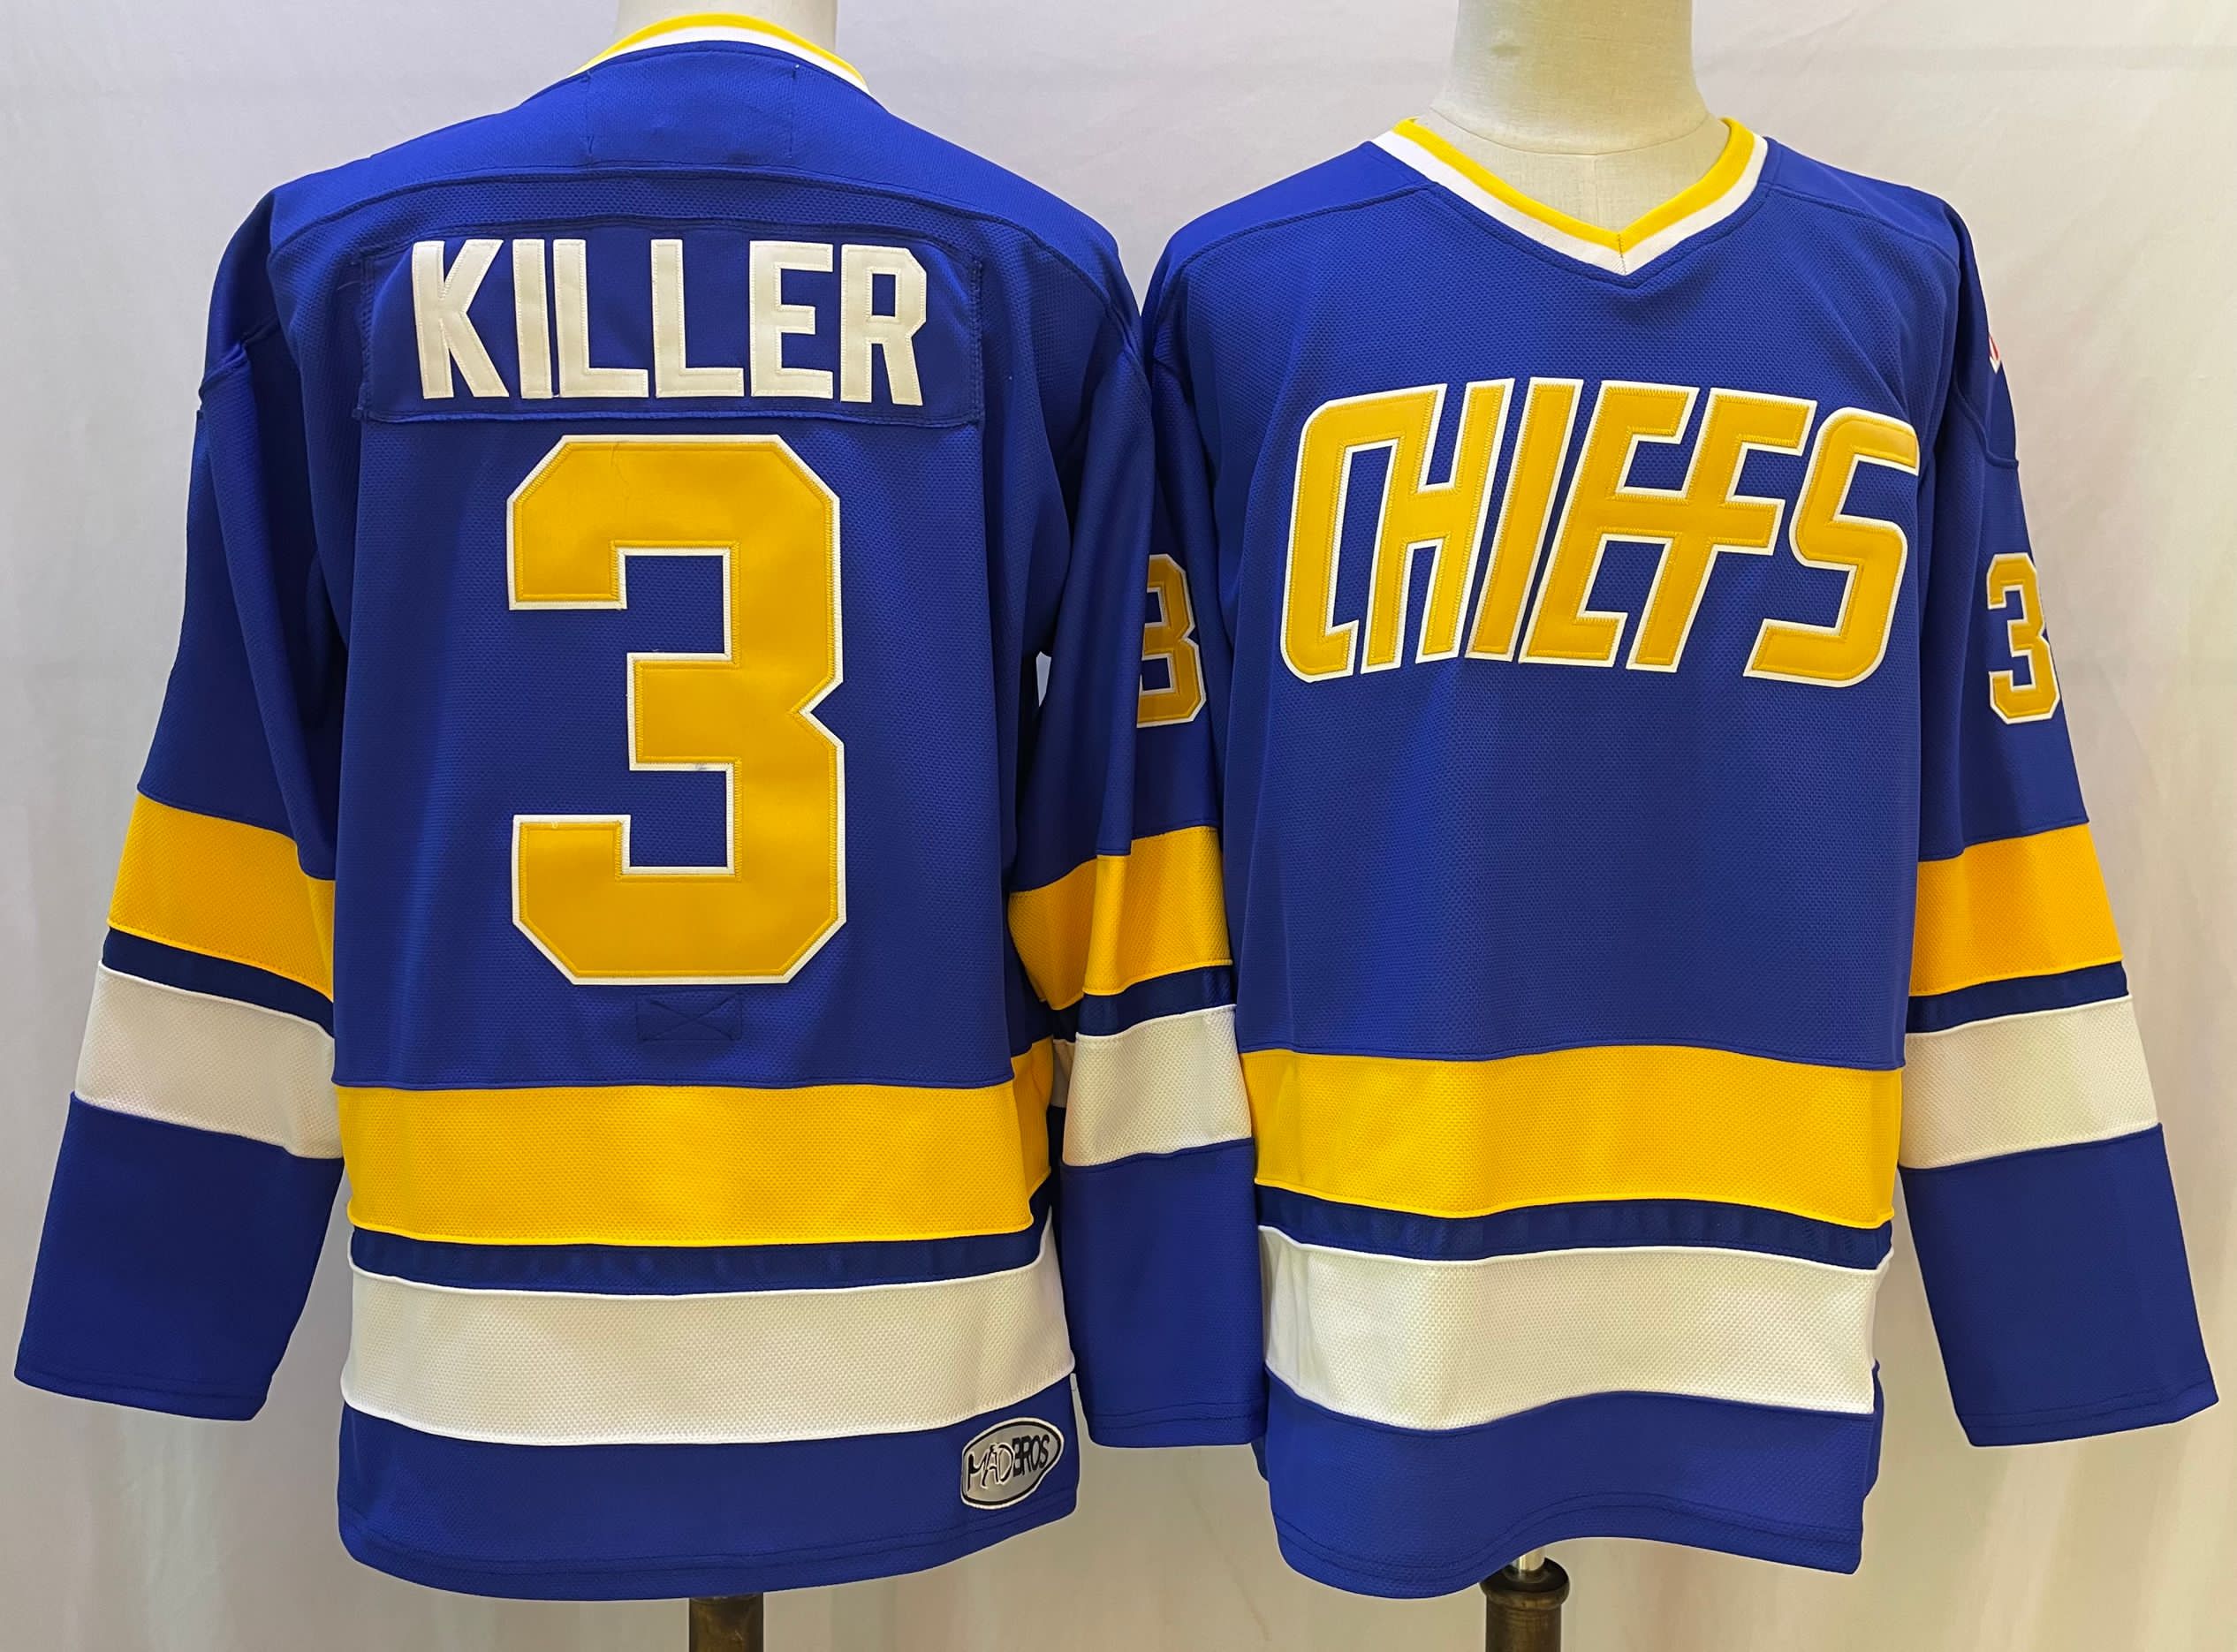 Wholesale Cheap The NHL Movie Edtion #3 KILLER Blue Jersey